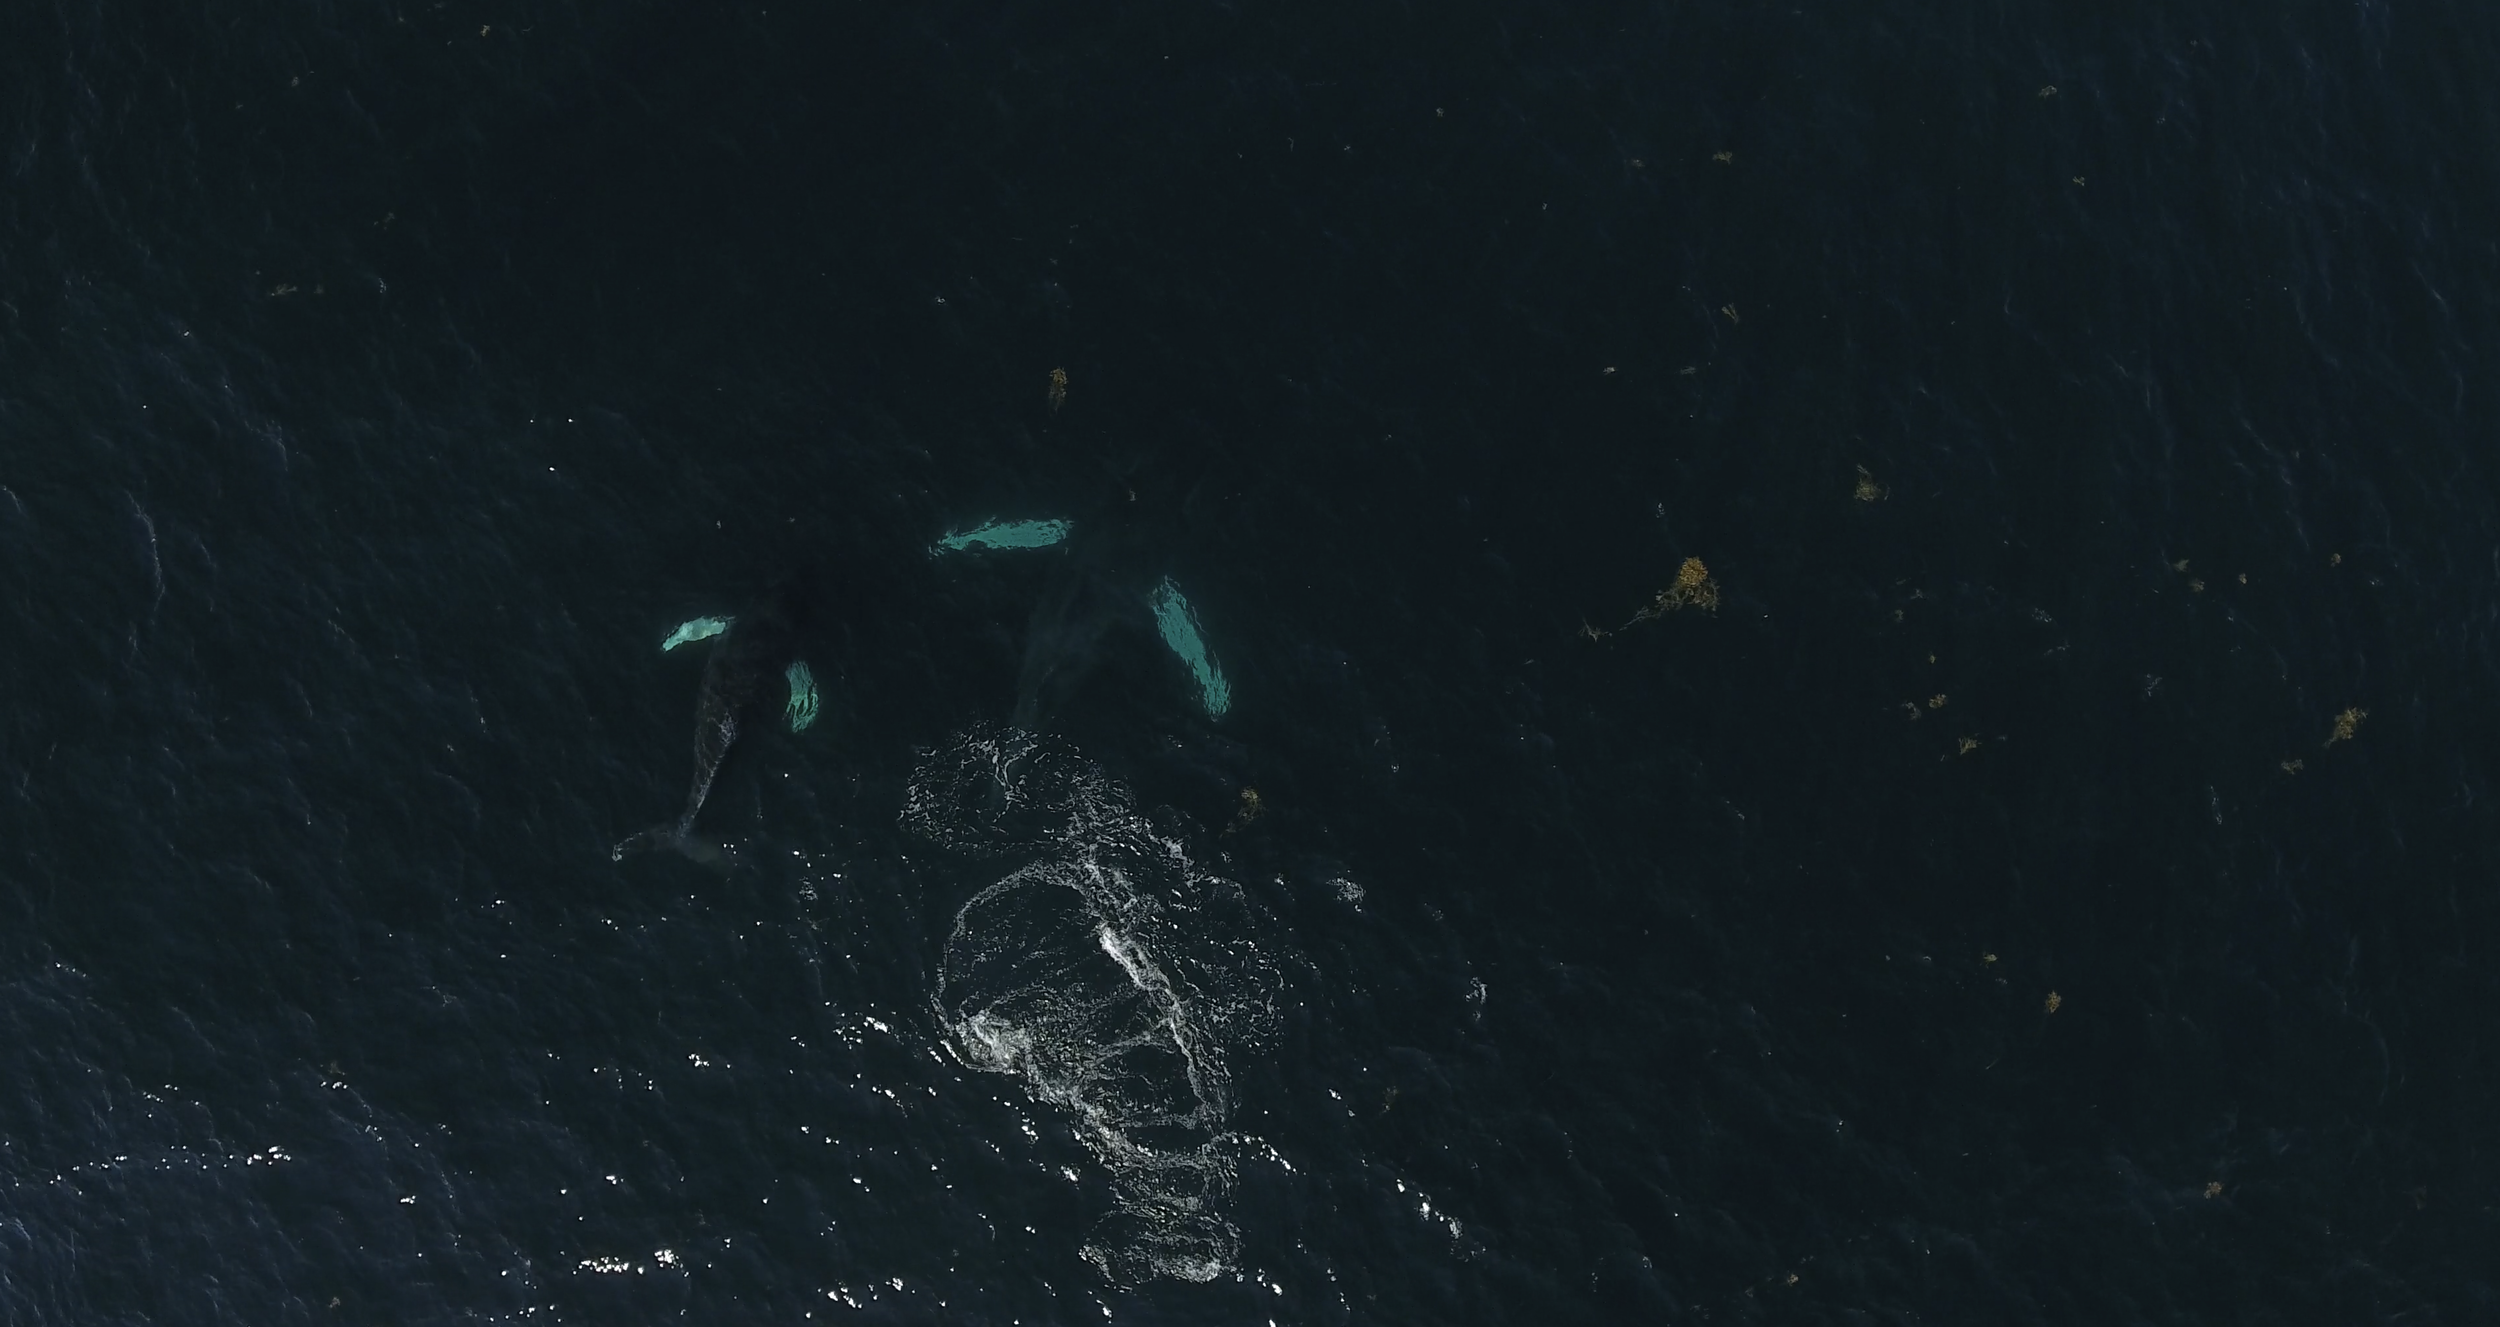 Still from Allied Whale’s drone footage of humpback whales (NOAA permit #20951)